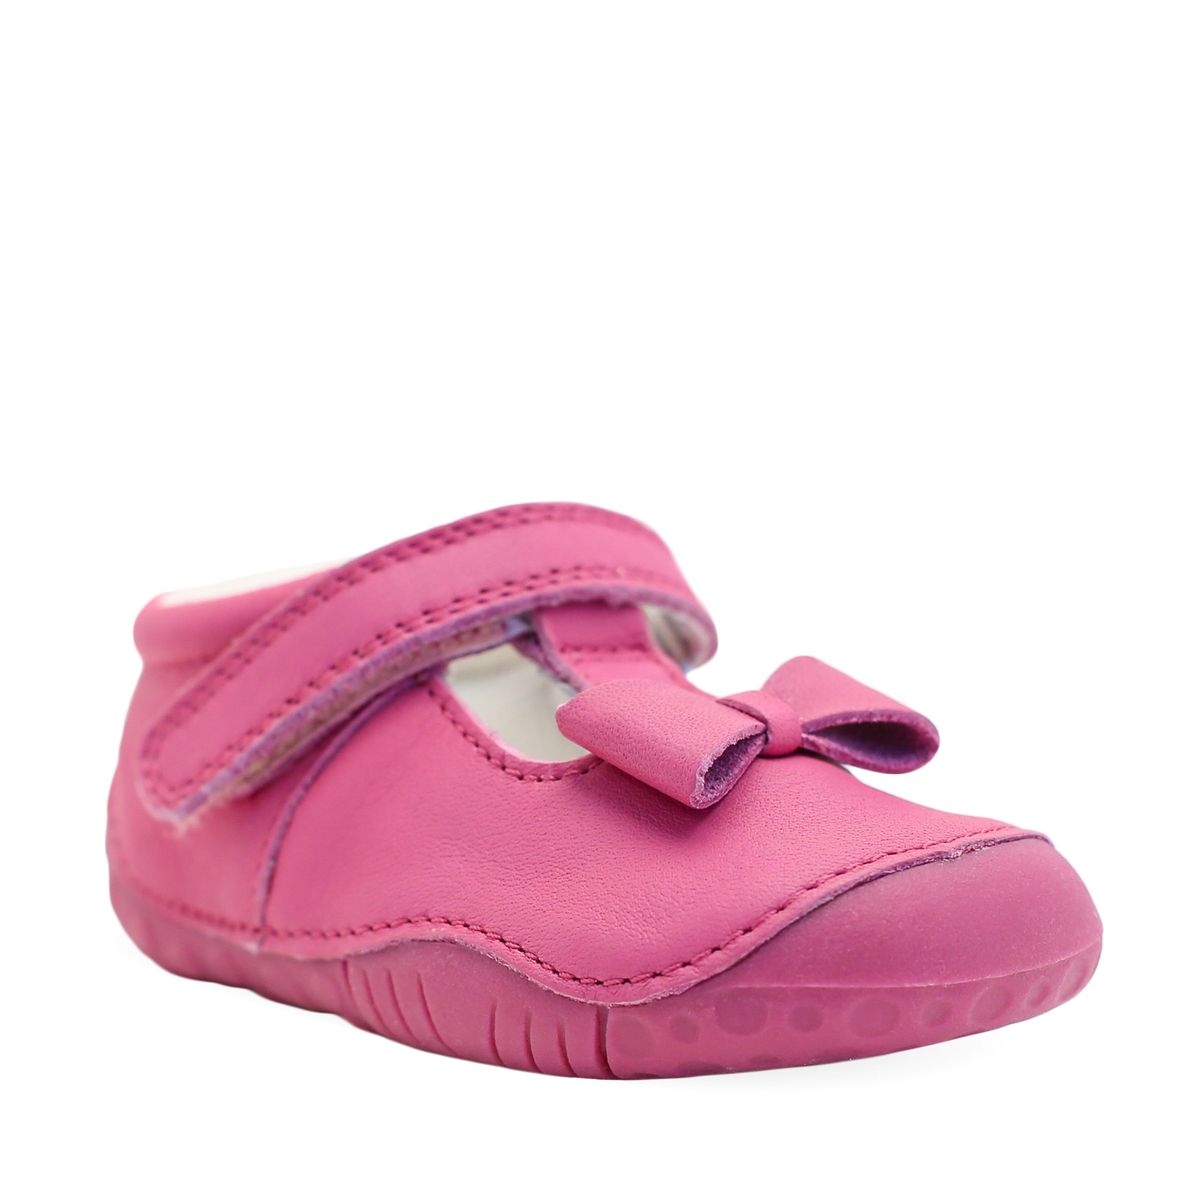 Little Pal in Dusty Leather Pink from the Start-Rite Shoes and JoJo Maman Bébé Collection 